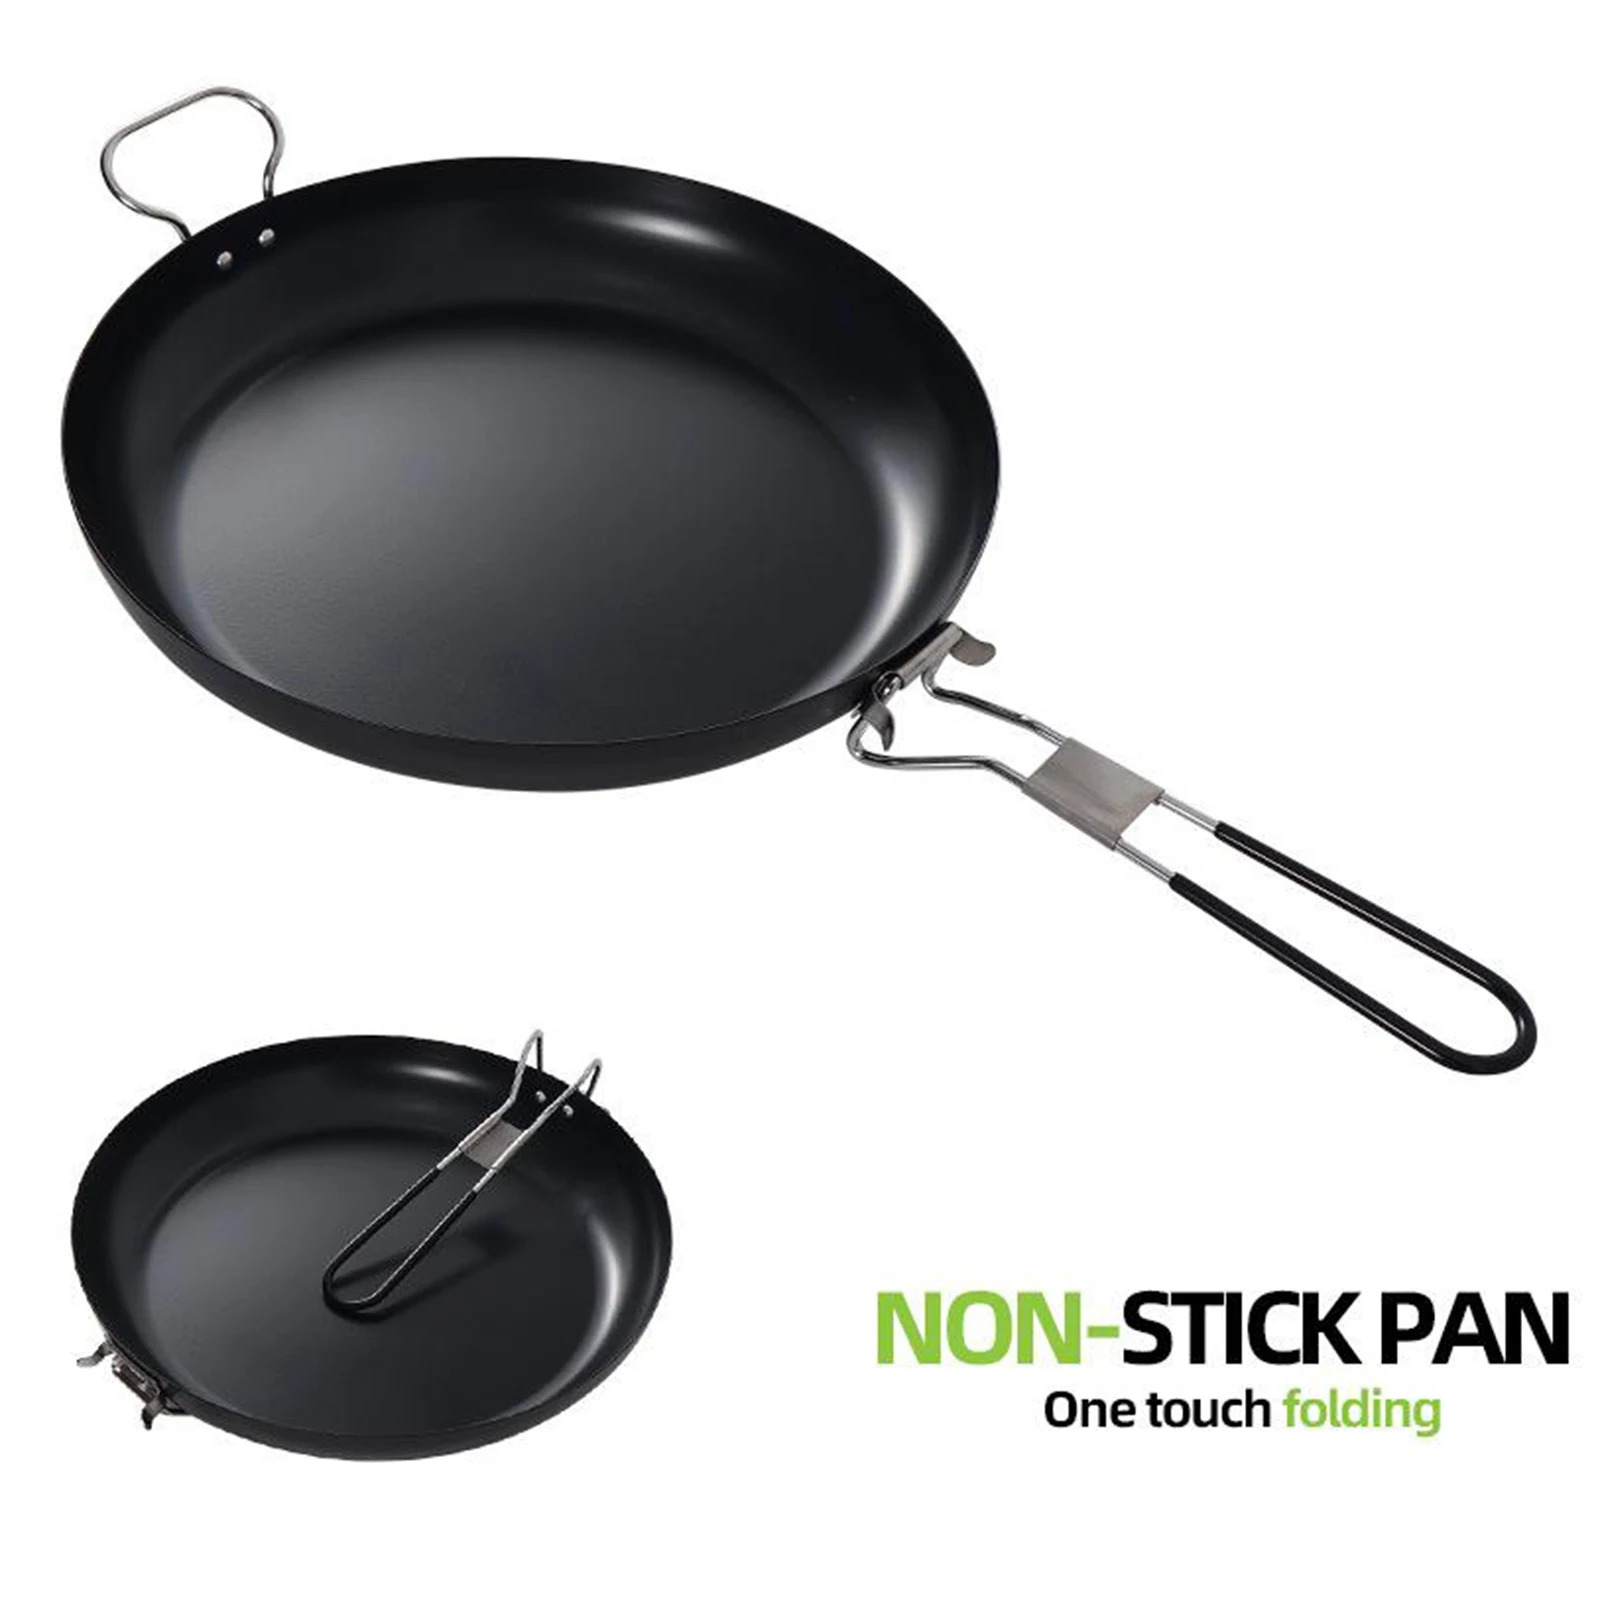 Mini Camping Cookware Nonstick Frying Pan Frypan Lightweight w/ Foldable Handle for Outdoor Hiking Picnic Backpacking